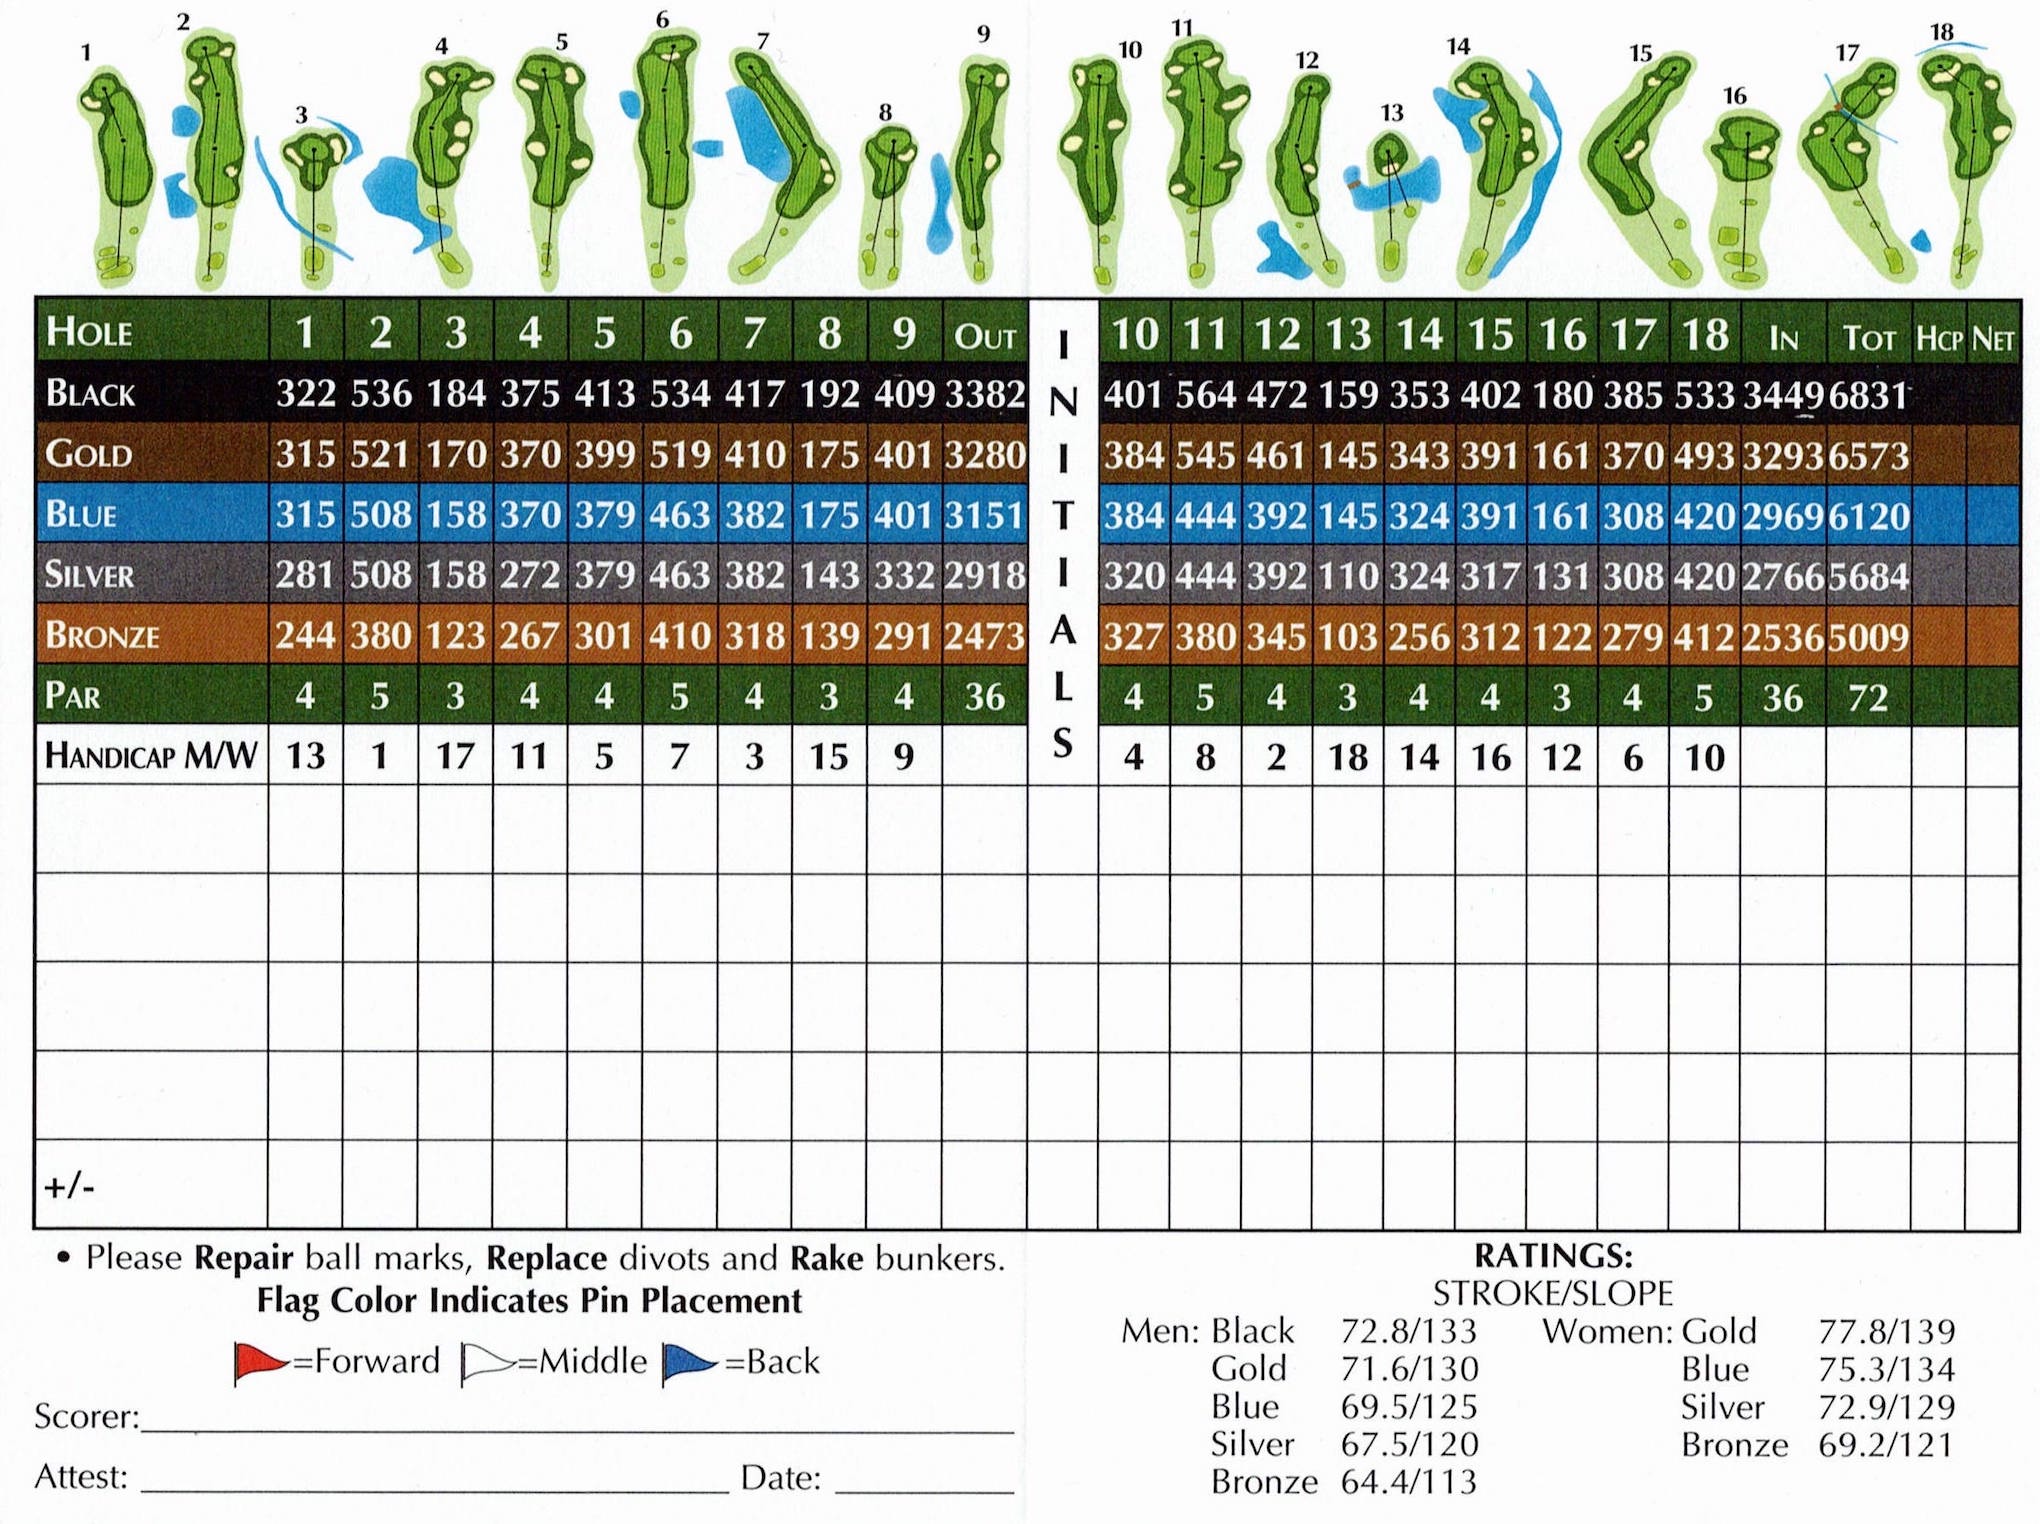 Scan of the scorecard from Deerfield Golf Club & Learning Center in Riverwoods, Illinois. 